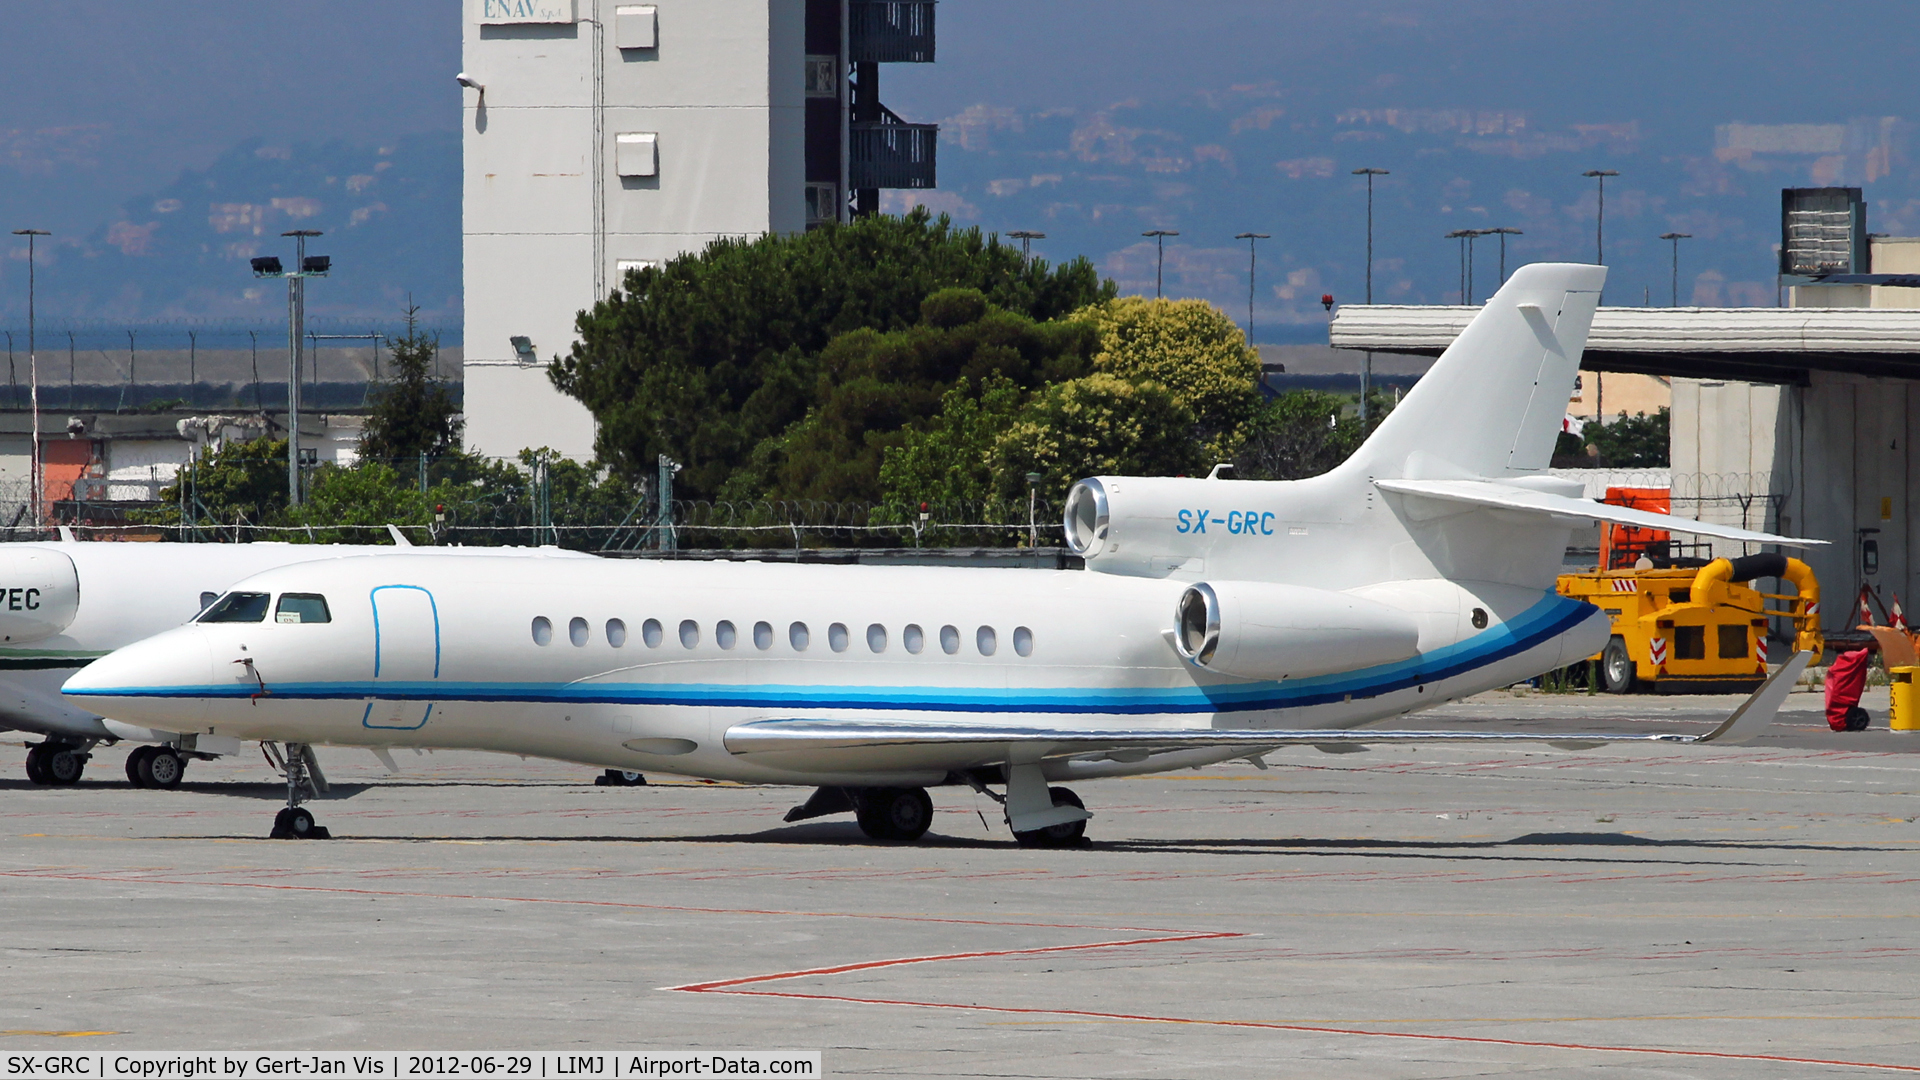 SX-GRC, 2010 Dassault Falcon 7X C/N 109, Taken from the road to the departurehall, facing some heatwaves.